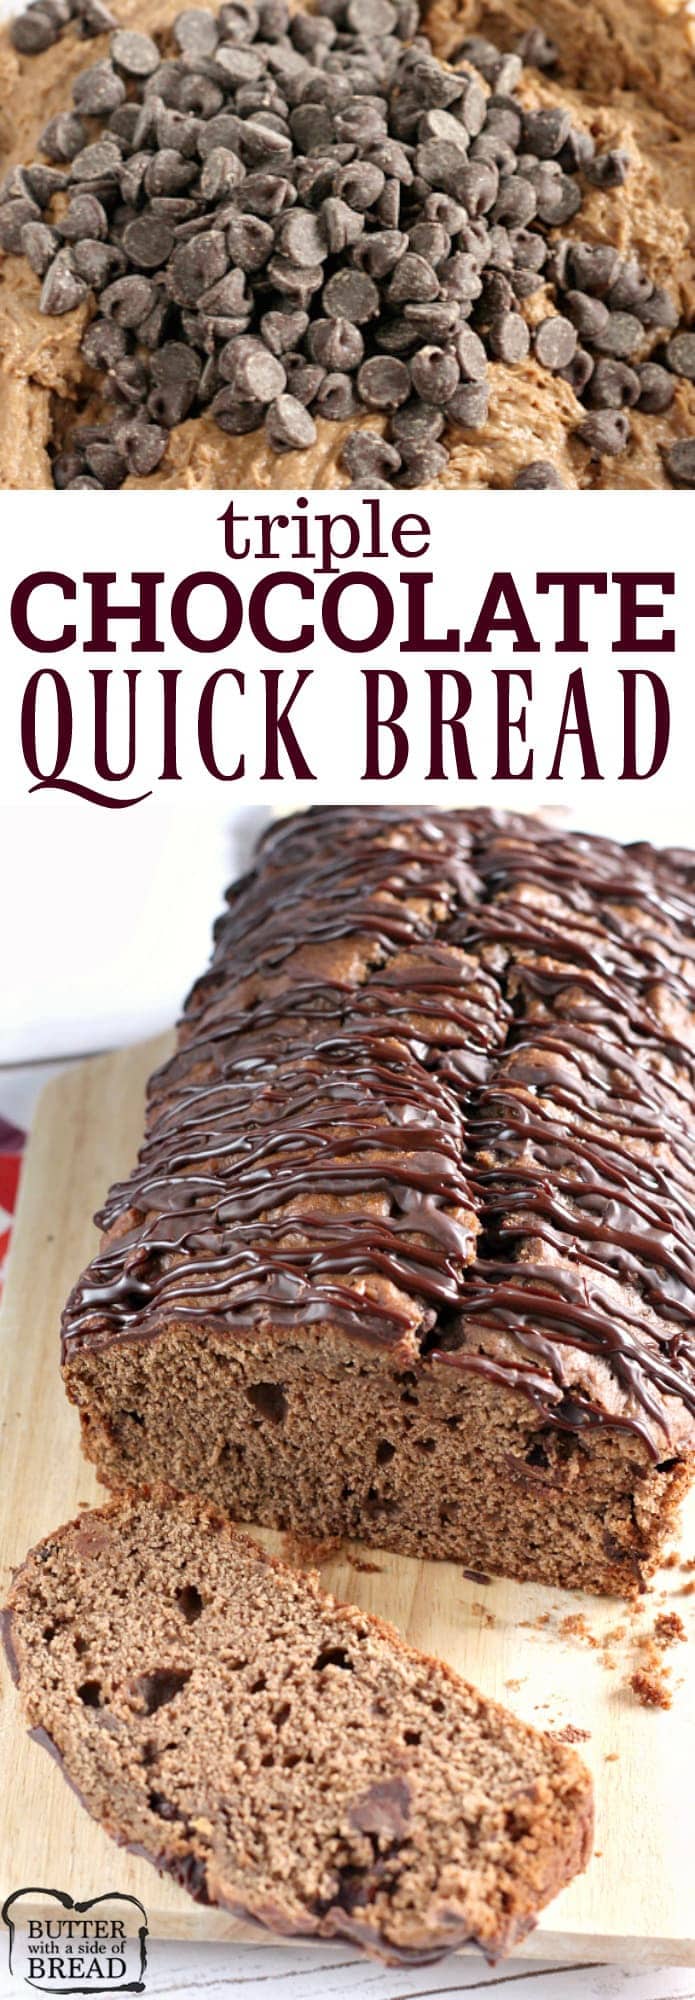 Triple Chocolate Quick Bread has melted chocolate and chocolate chips in the batter, plus a delicious chocolate drizzle on the top! Delicious #Chocolate #Bread made easy, NO YEAST! from Butter With A Side of Bread #baking #recipe #chocolatechips #easy 